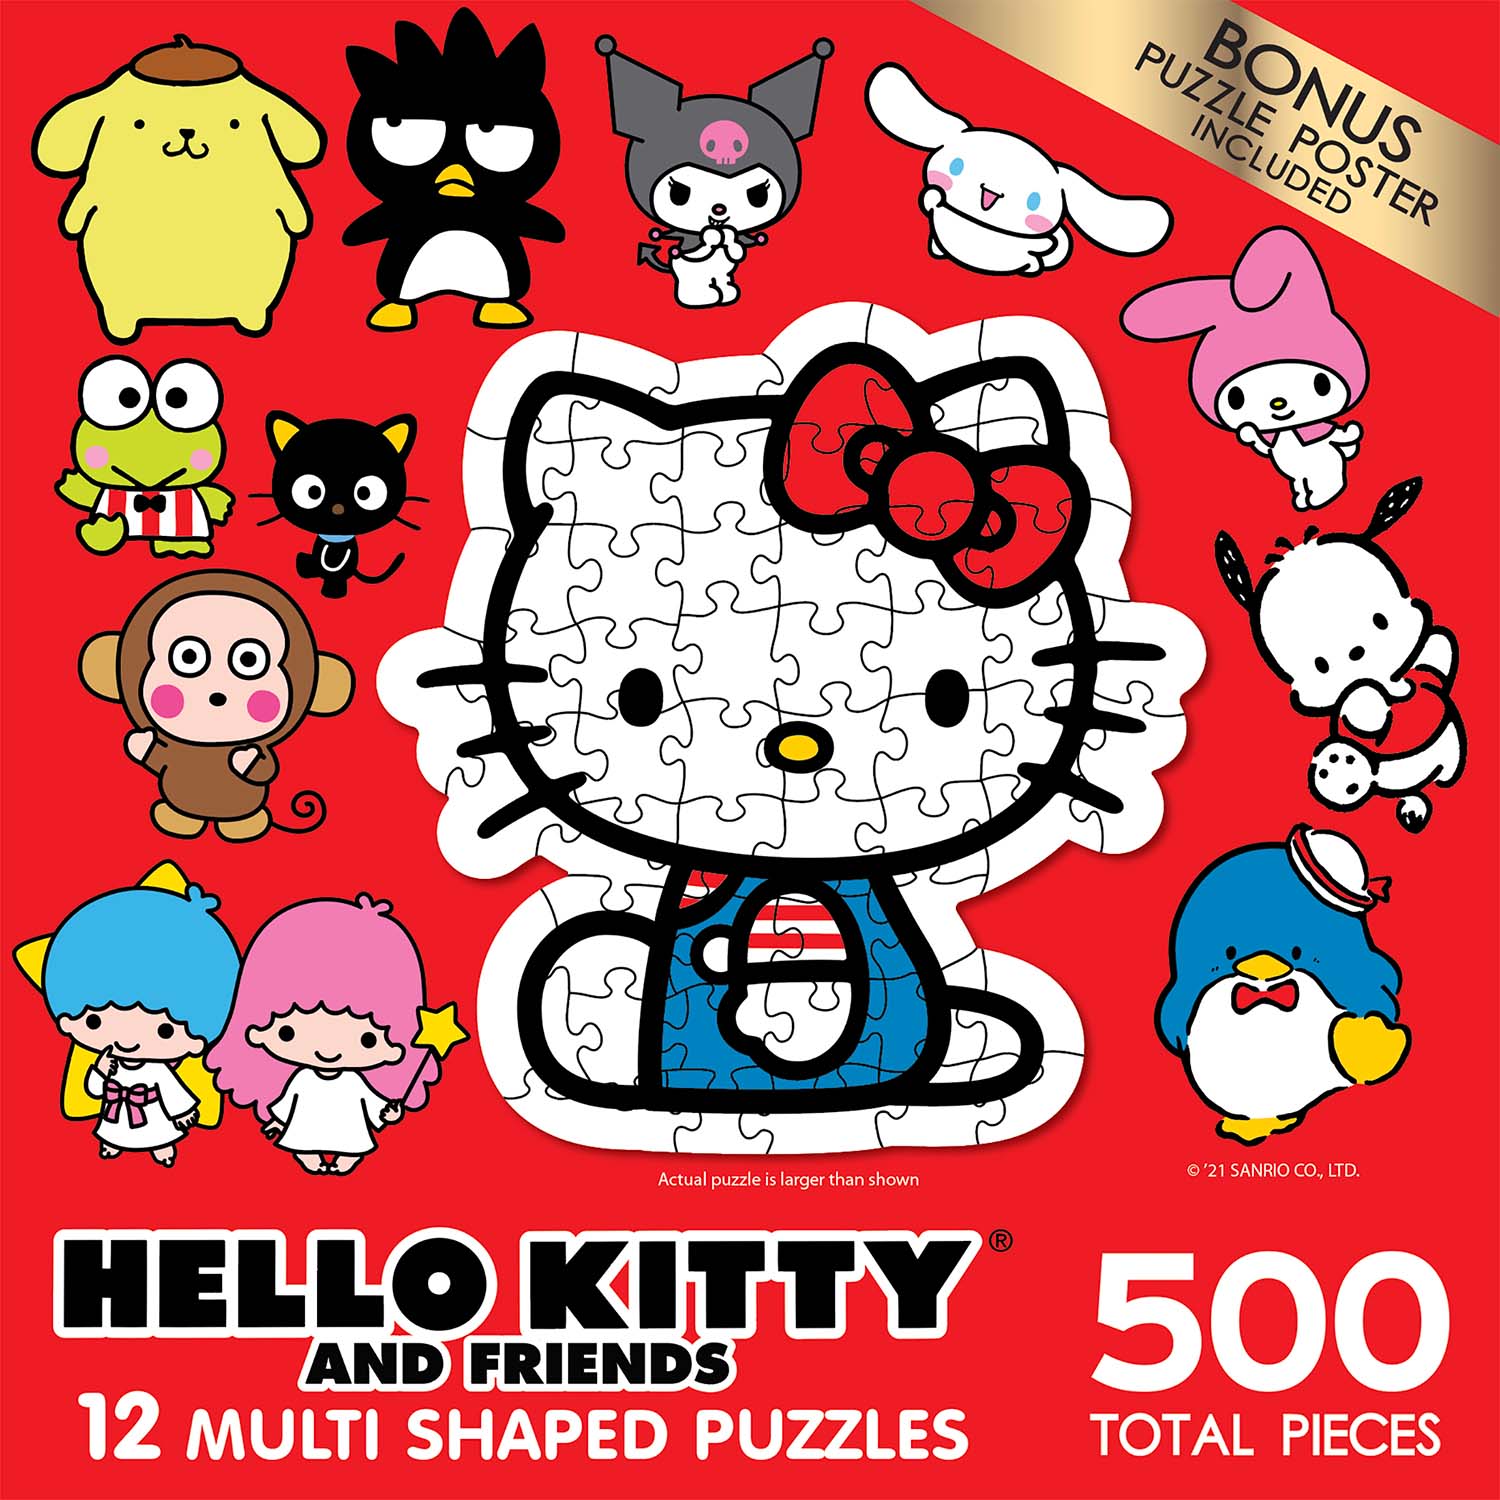 Hello Kitty, 500 Pieces, RoseArt | Puzzle Warehouse